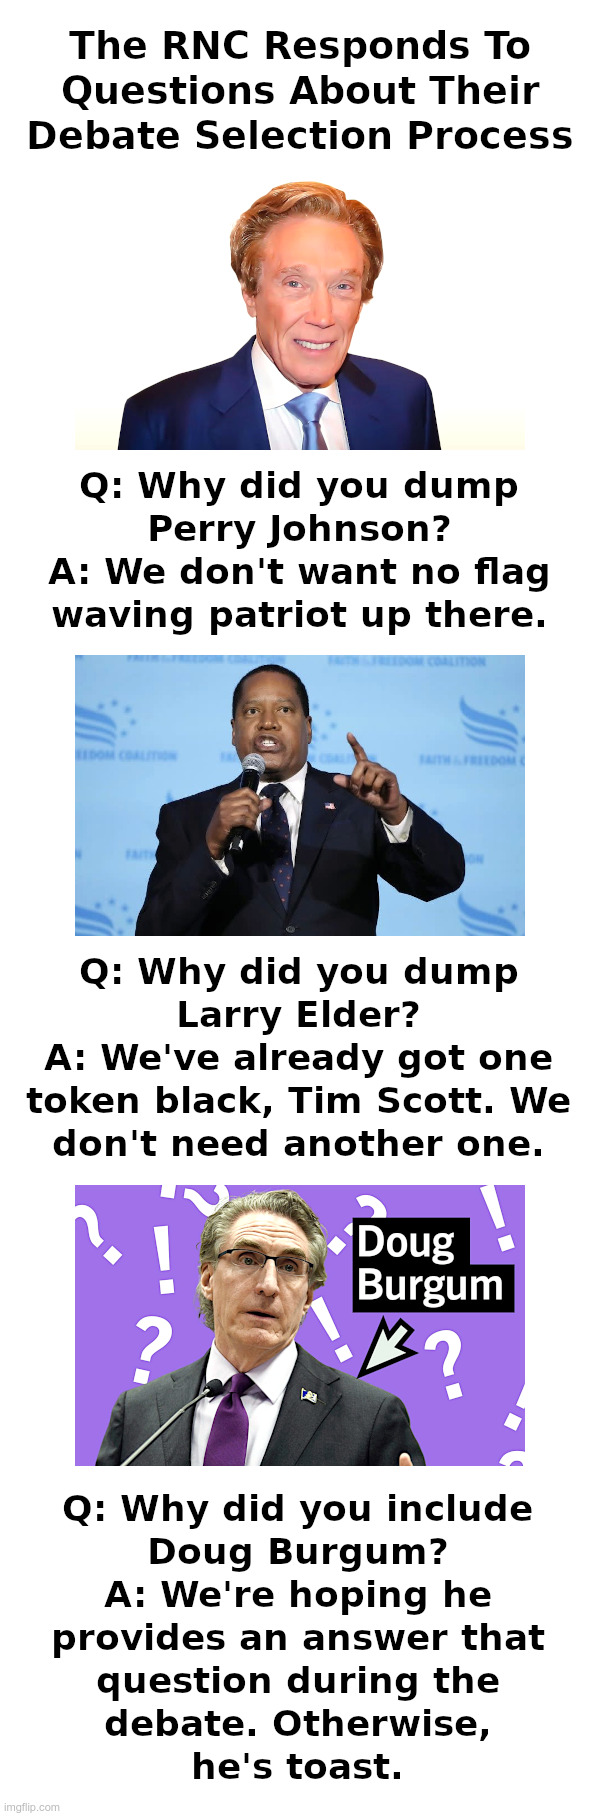 The RNC Responds to Questions About Their Debate Selection Process | image tagged in rnc,idiots,screwed,presidential candidates,perry johnson,larry elder | made w/ Imgflip meme maker